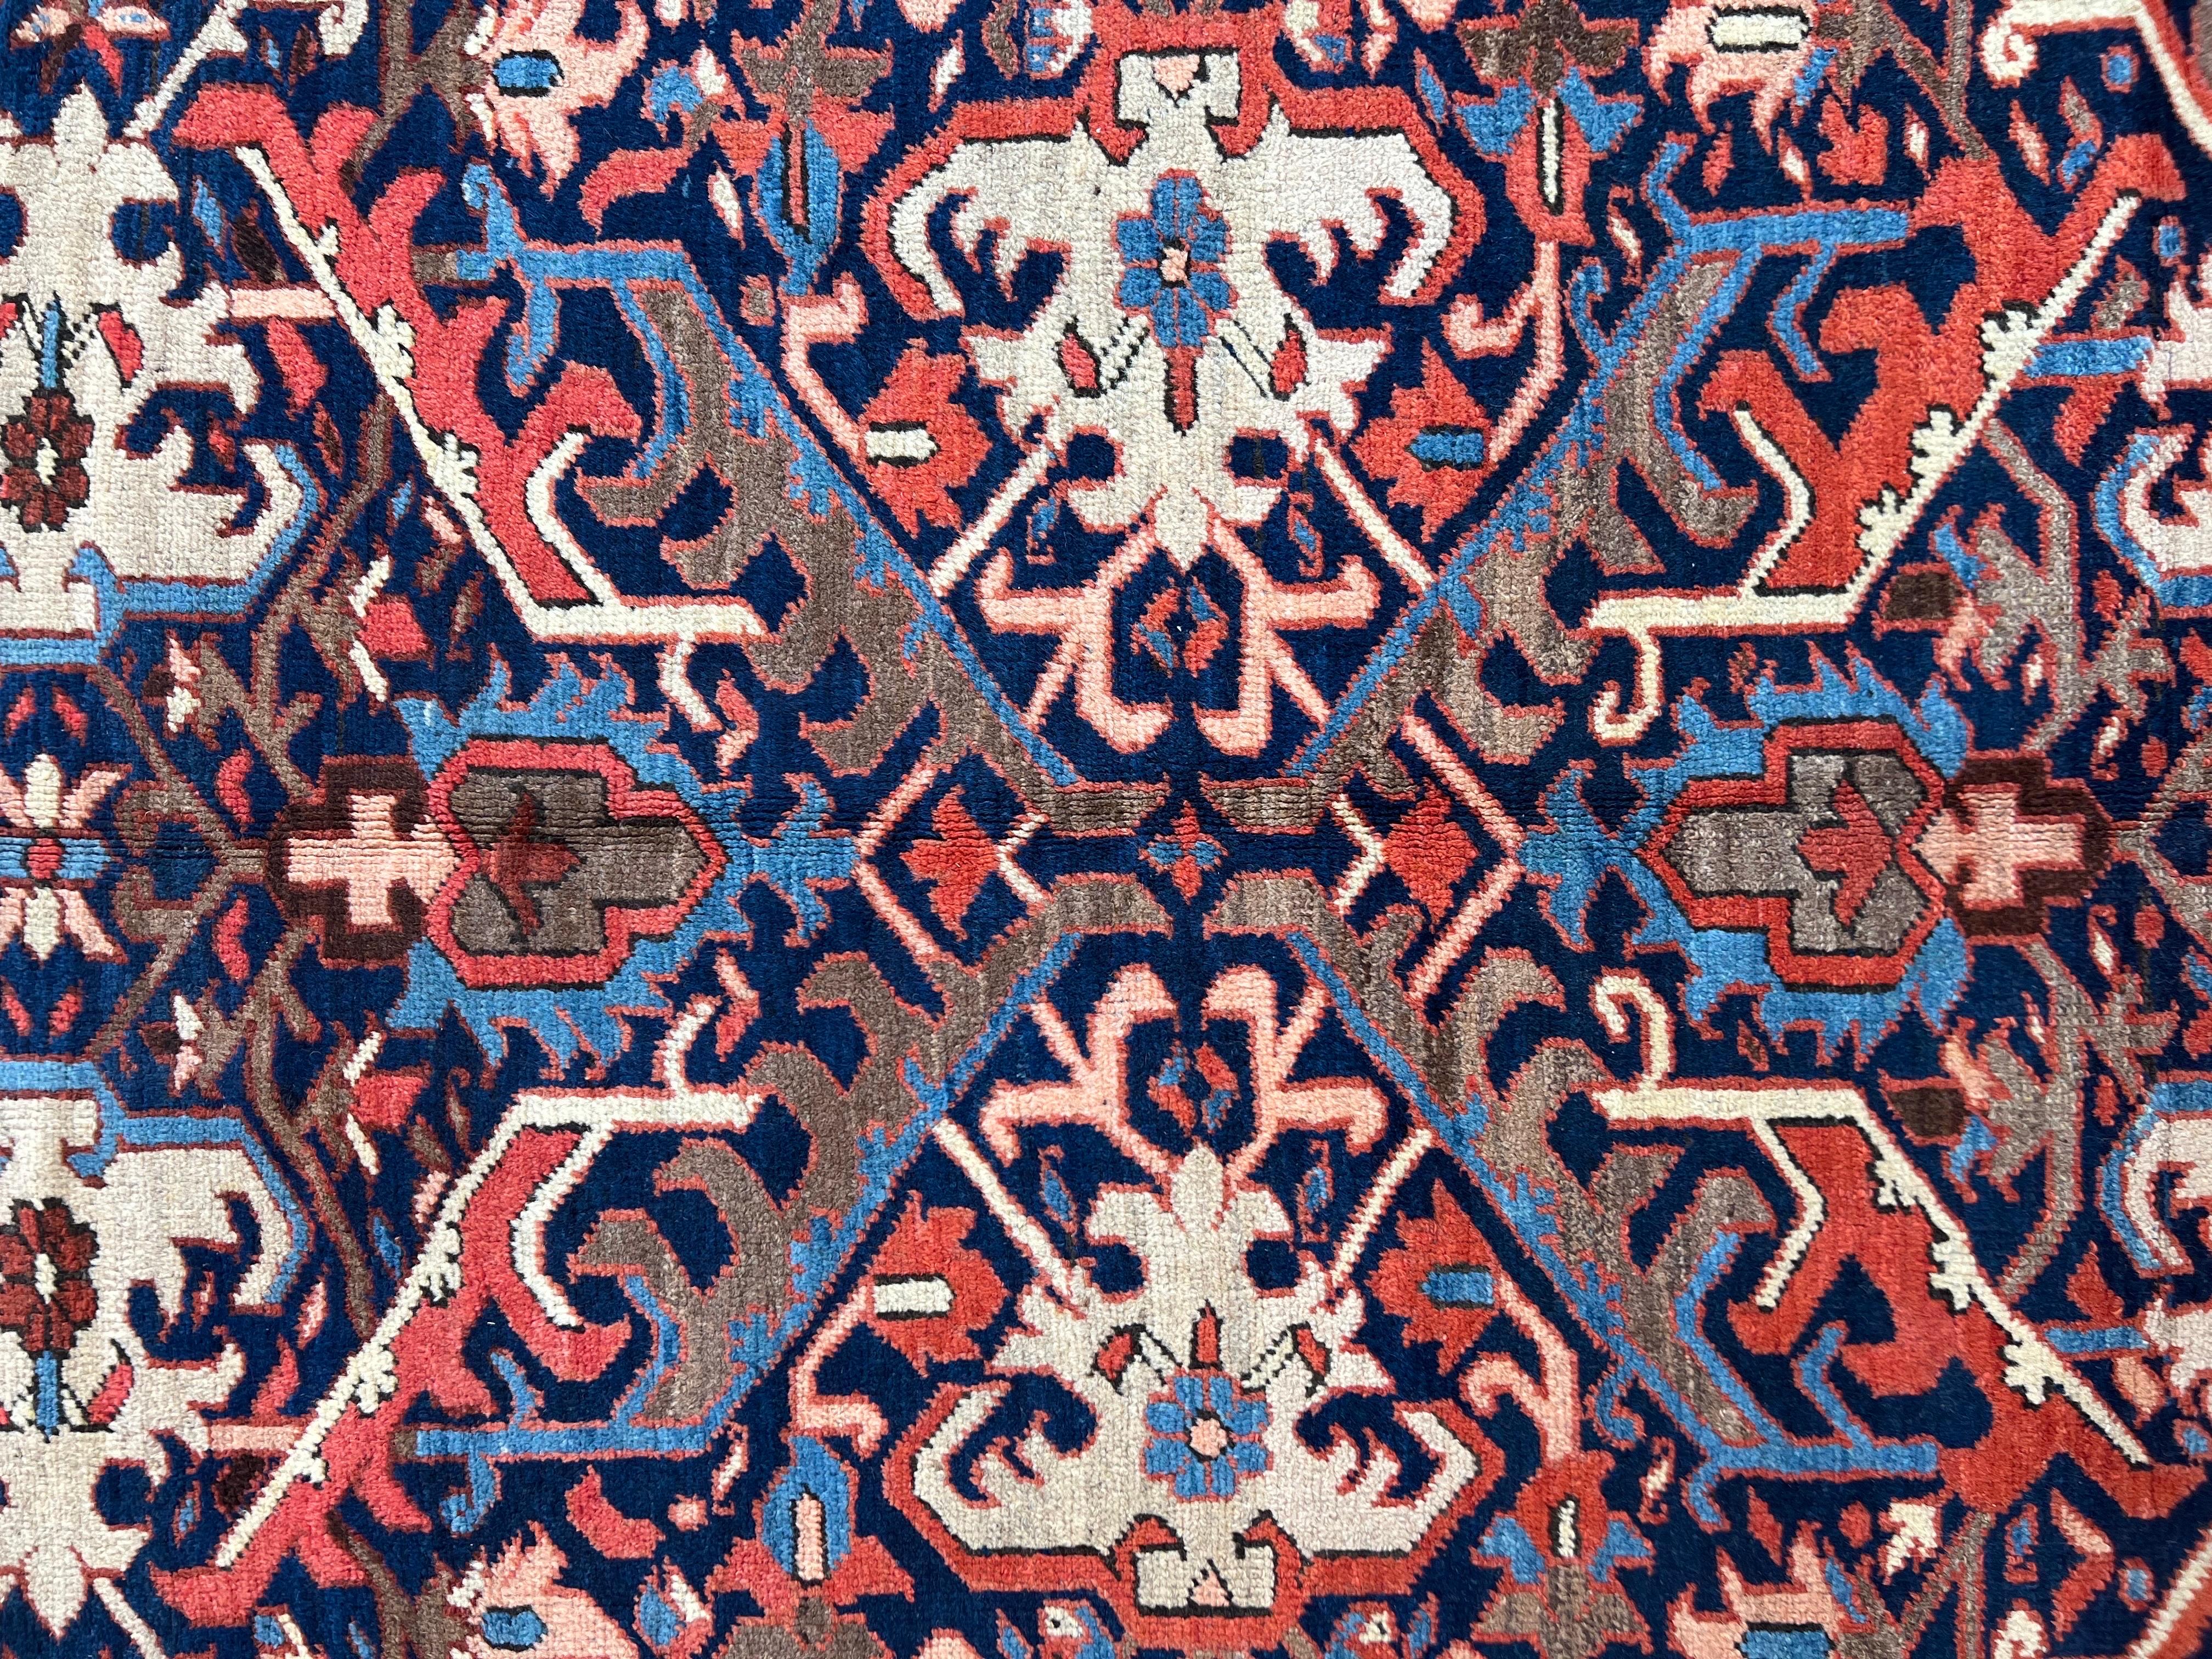 8’8 x 12

The large scale of the pattern on this Persian Heriz carpet is wonderful! An allover pattern is typically a tighter, smaller scale. This one feels so grande! Blue field's are in demand right now and are harder and harder to find. The taupe